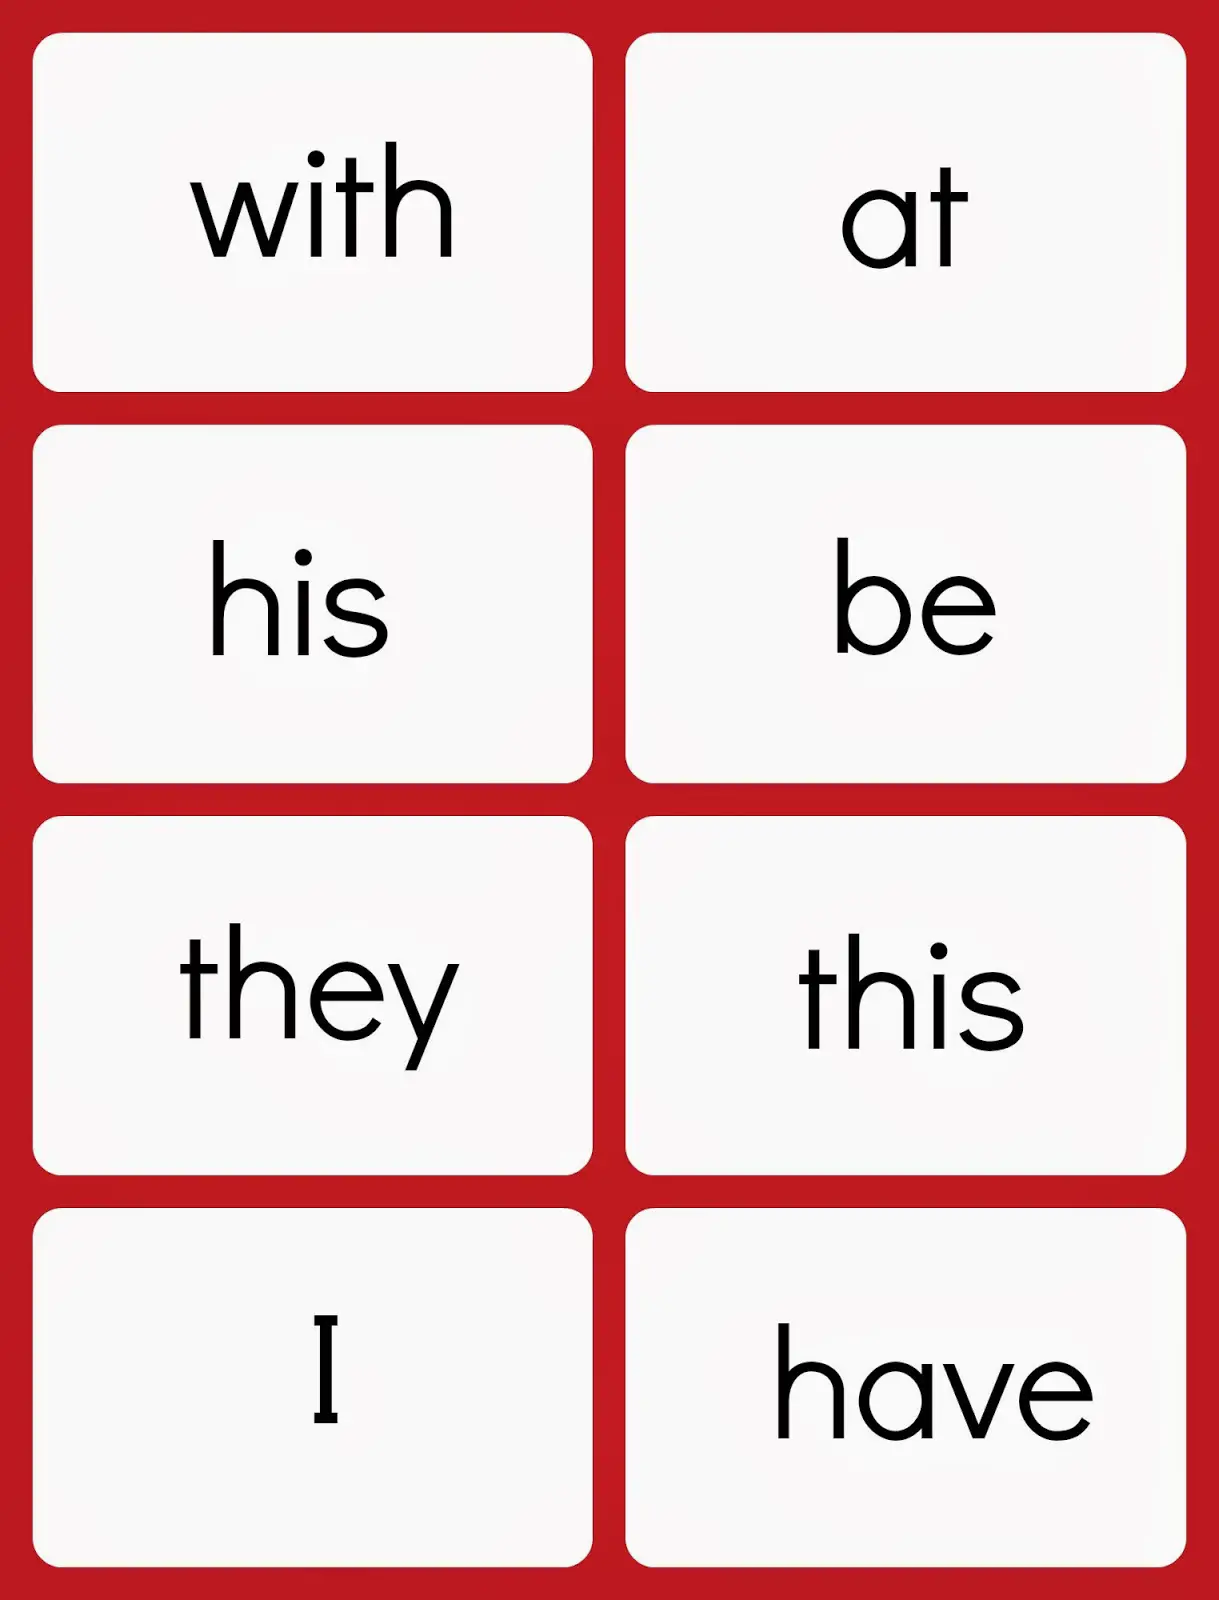 books with sight words first grade pdf